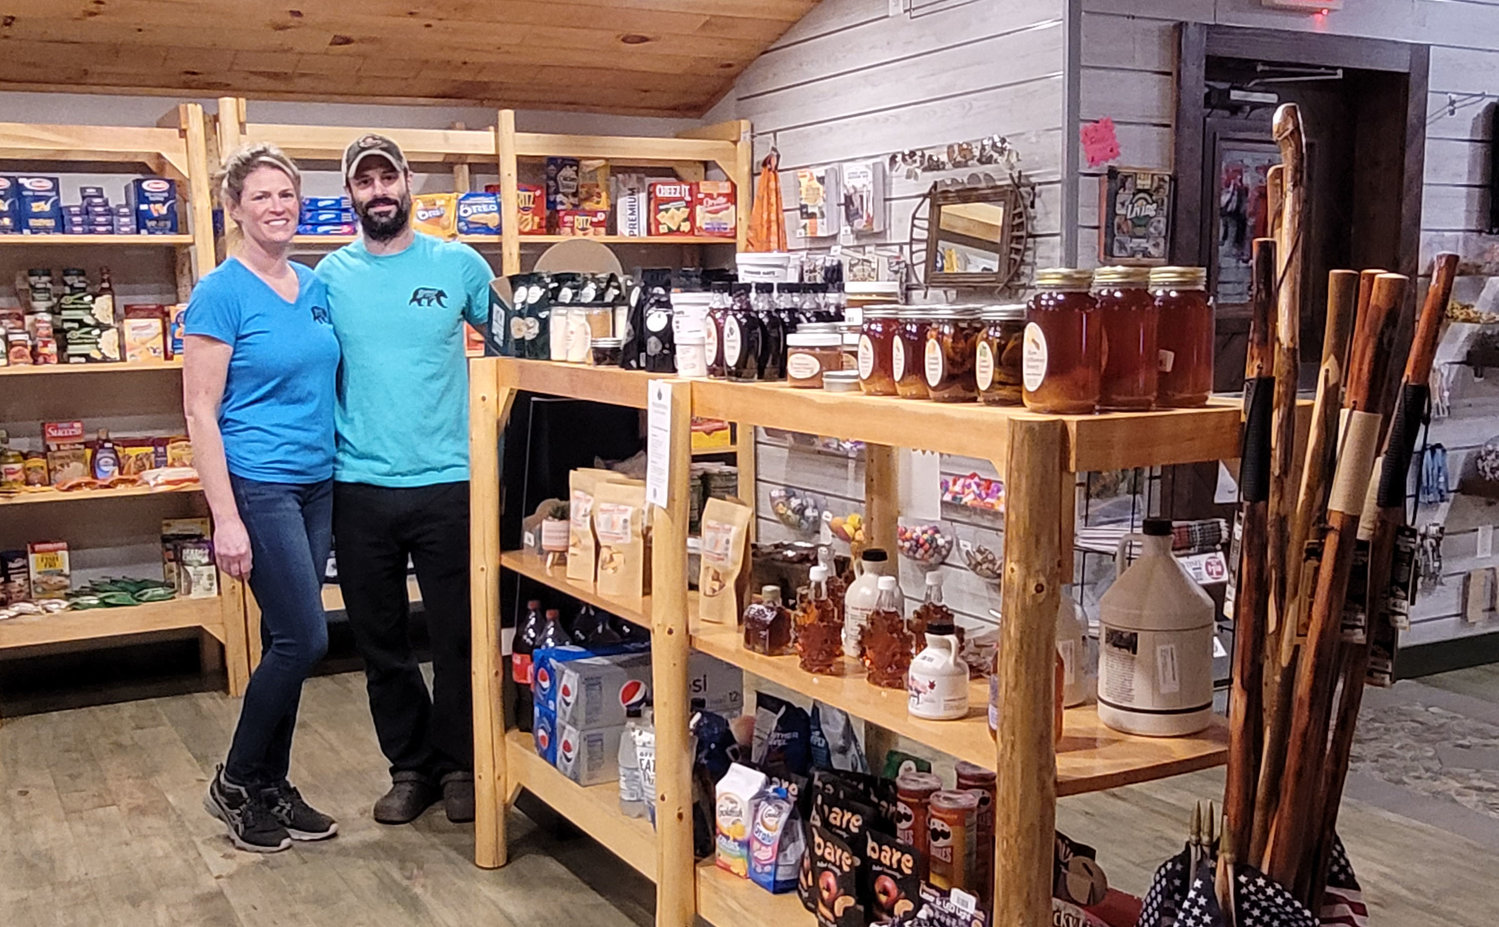 Amy Nelson and Aaron LaBella, both co-owners of Bonnie’s Country Store pause for a photo amid one of the store’s many display areas.